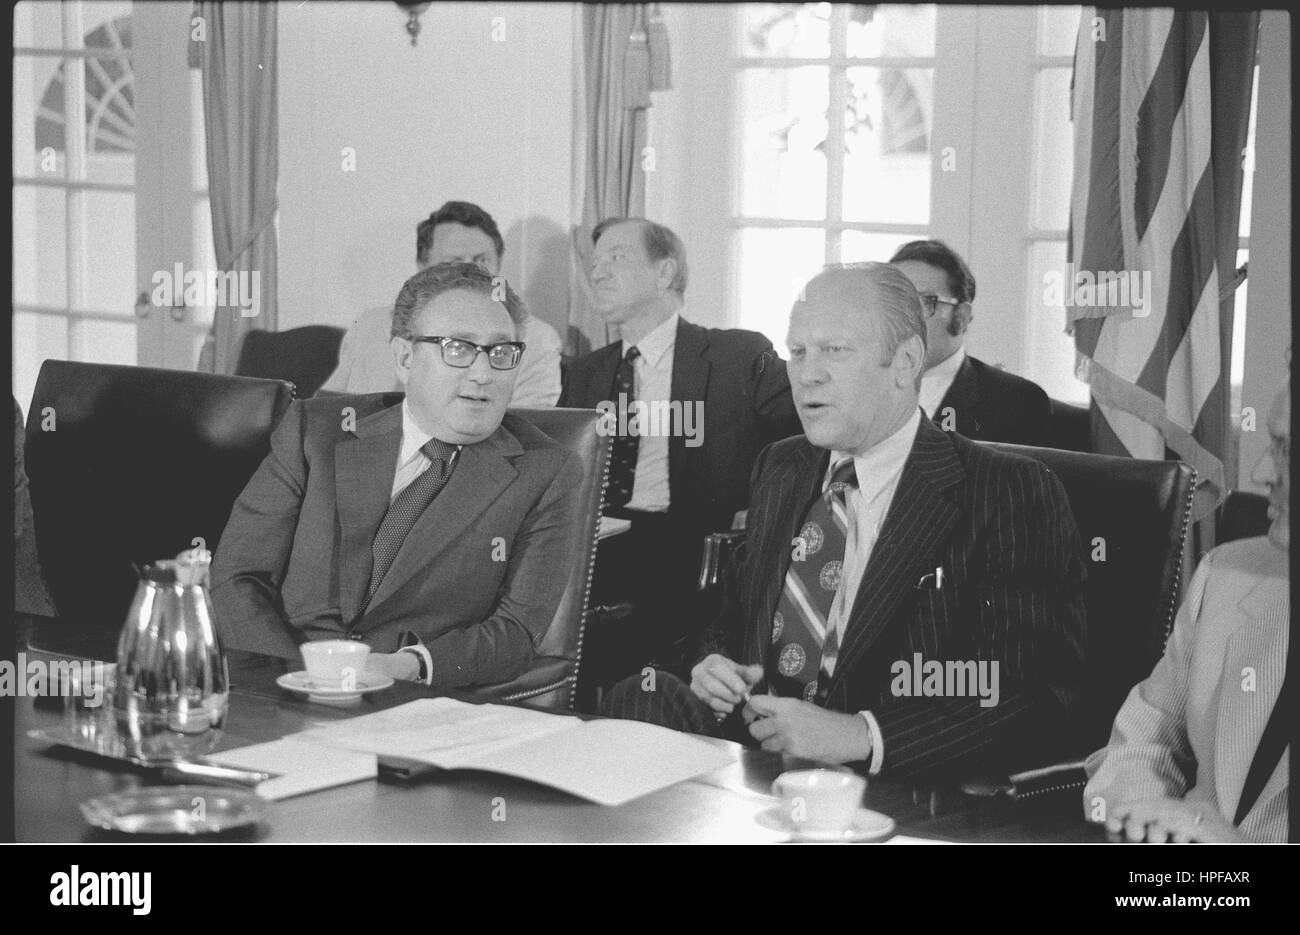 Secretary of State Henry Kissinger and President Gerald Ford seated at a conference table in the White House during a cabinet meeting, Washington, DC, 06/04/1975. Stock Photo